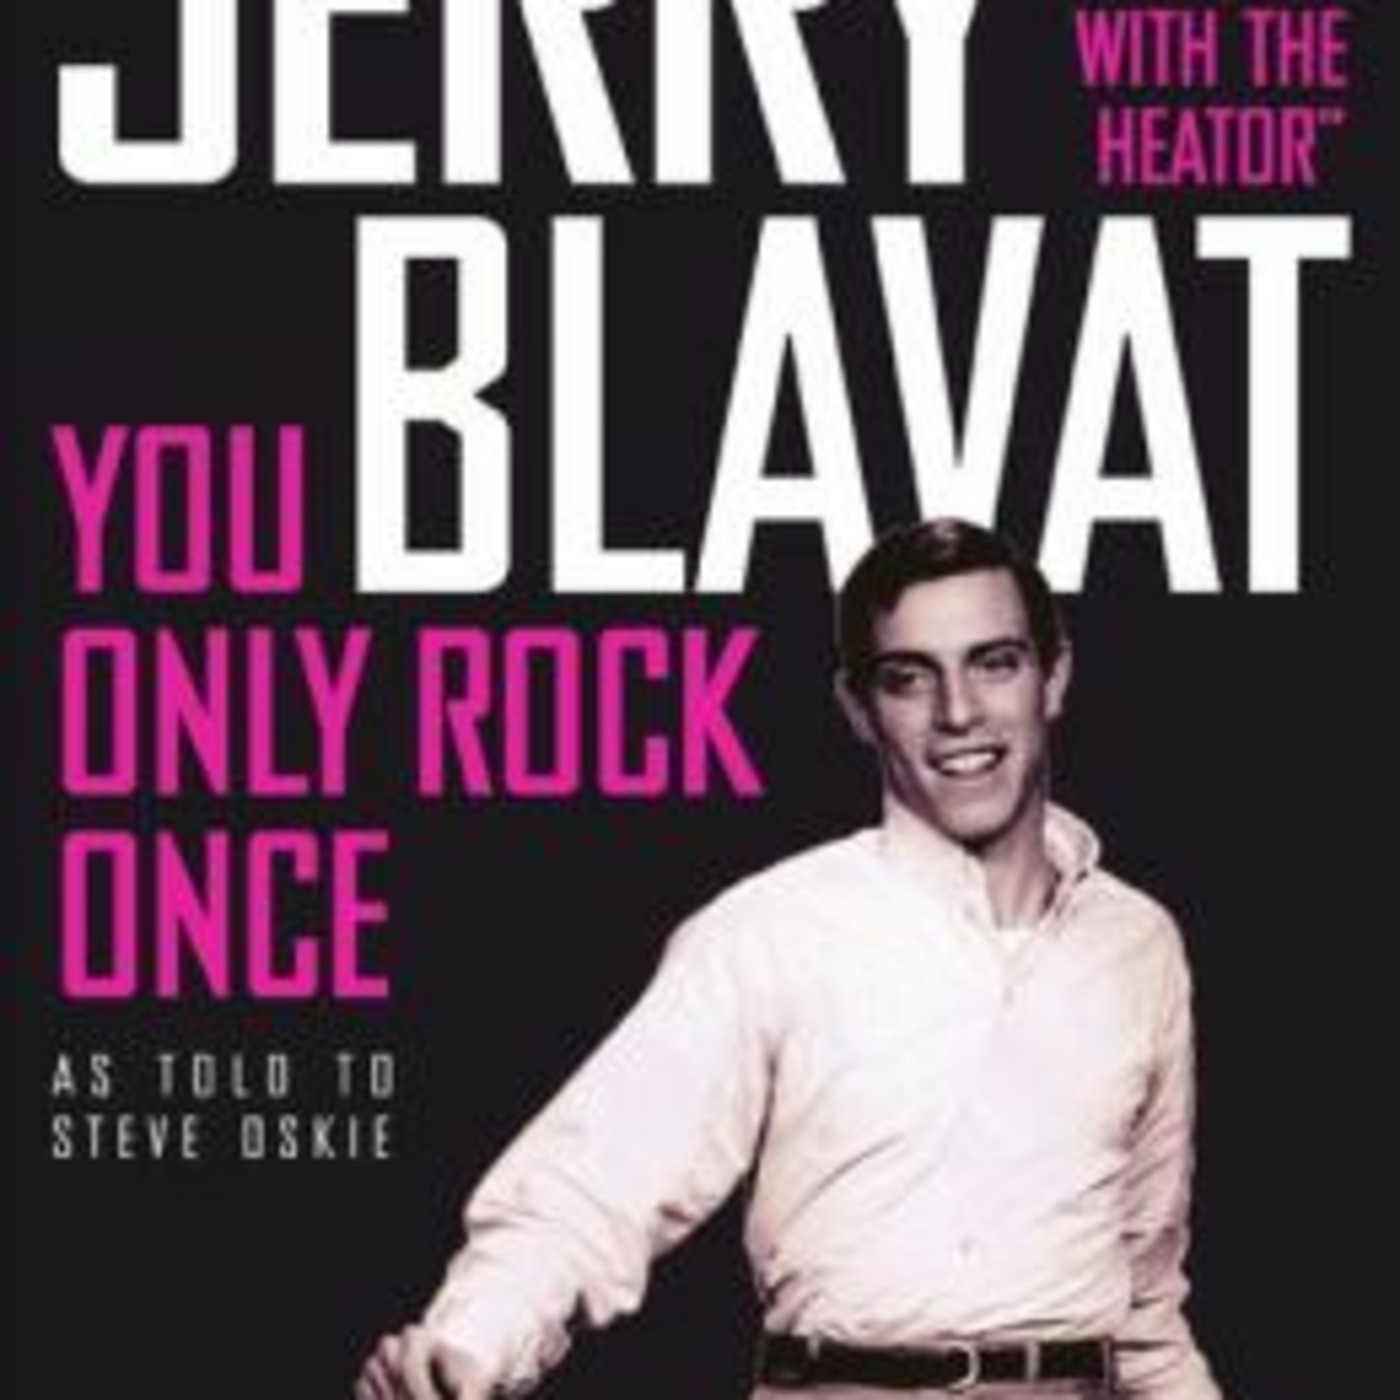 Episode 2449: Jerry Blavat ~  Rock & Roll Hall of Fame, Tribute to Broadcast Icon  "The Geator" , You Only Rock Once!!